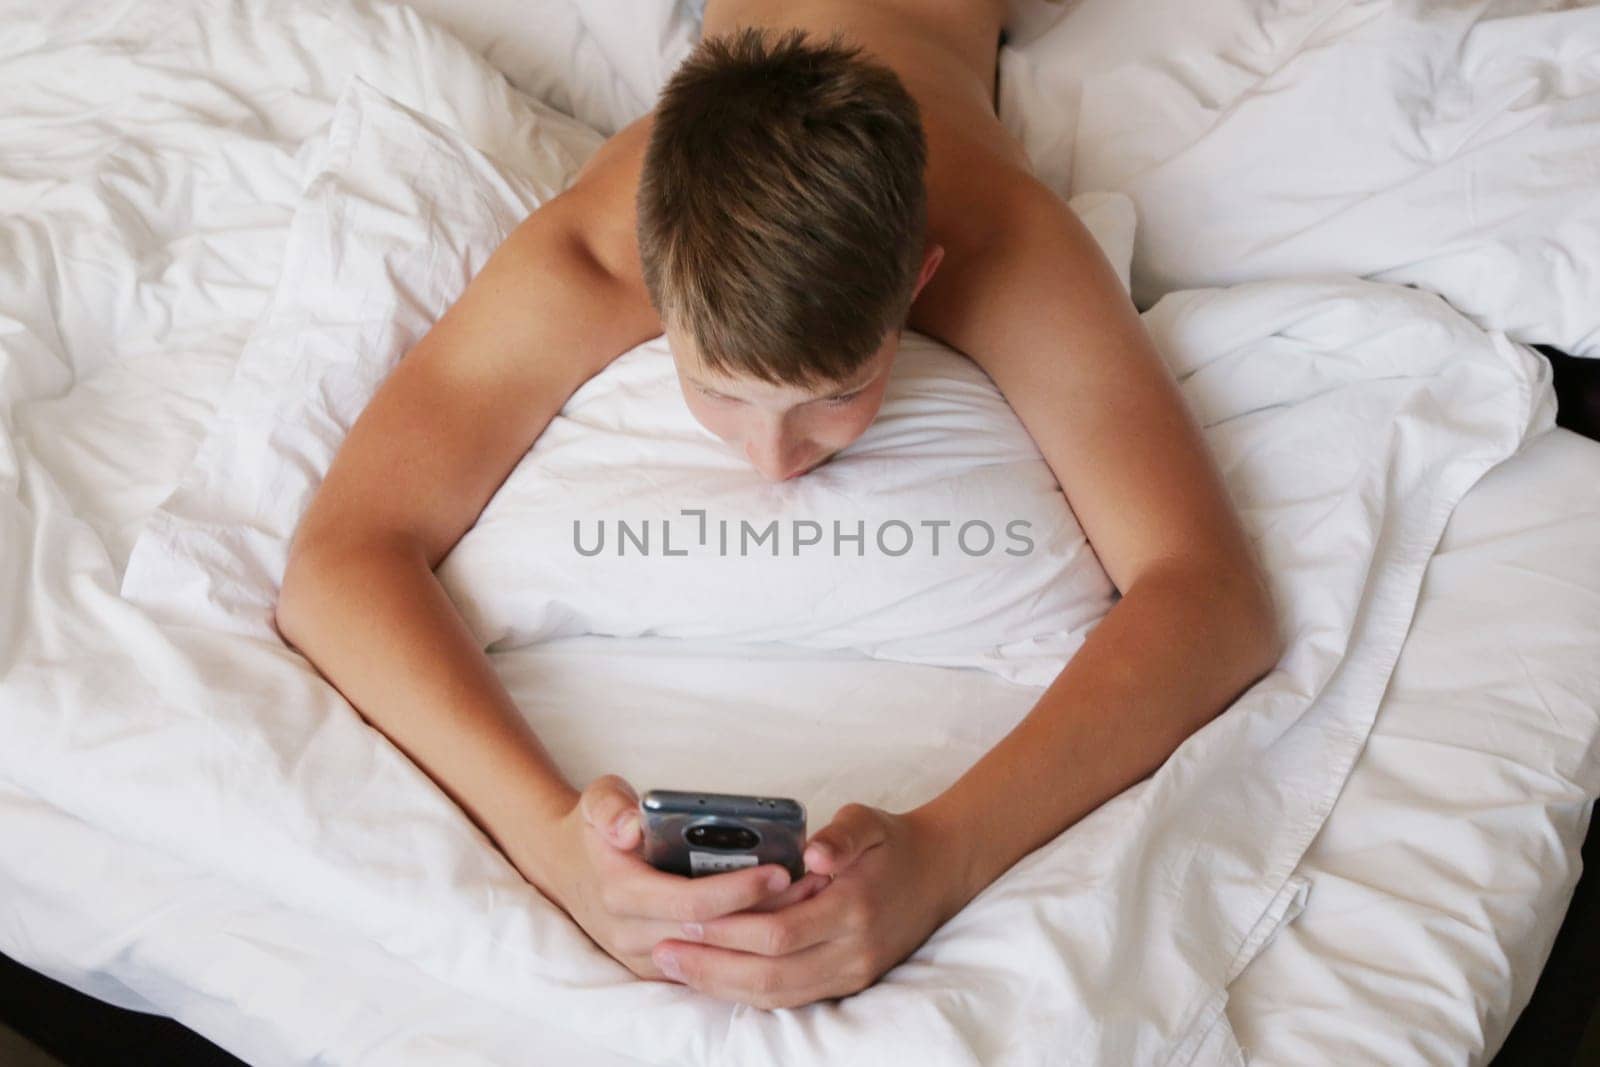 The boy lies on the bed with the phone. by gelog67